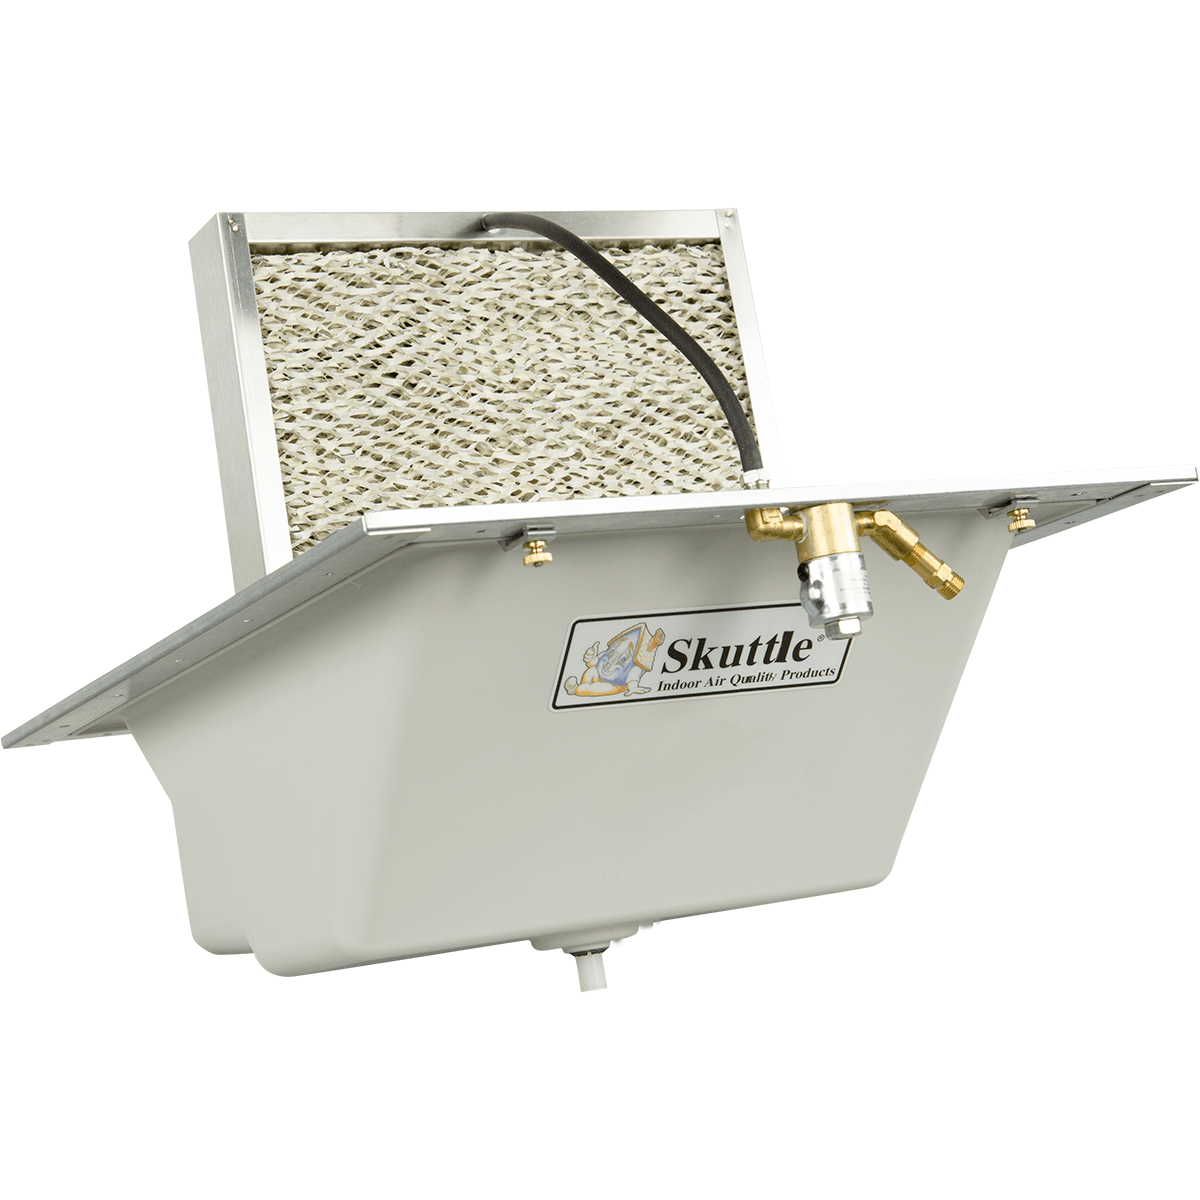 Skuttle 55-ud Flow-through Under Duct Humidifier